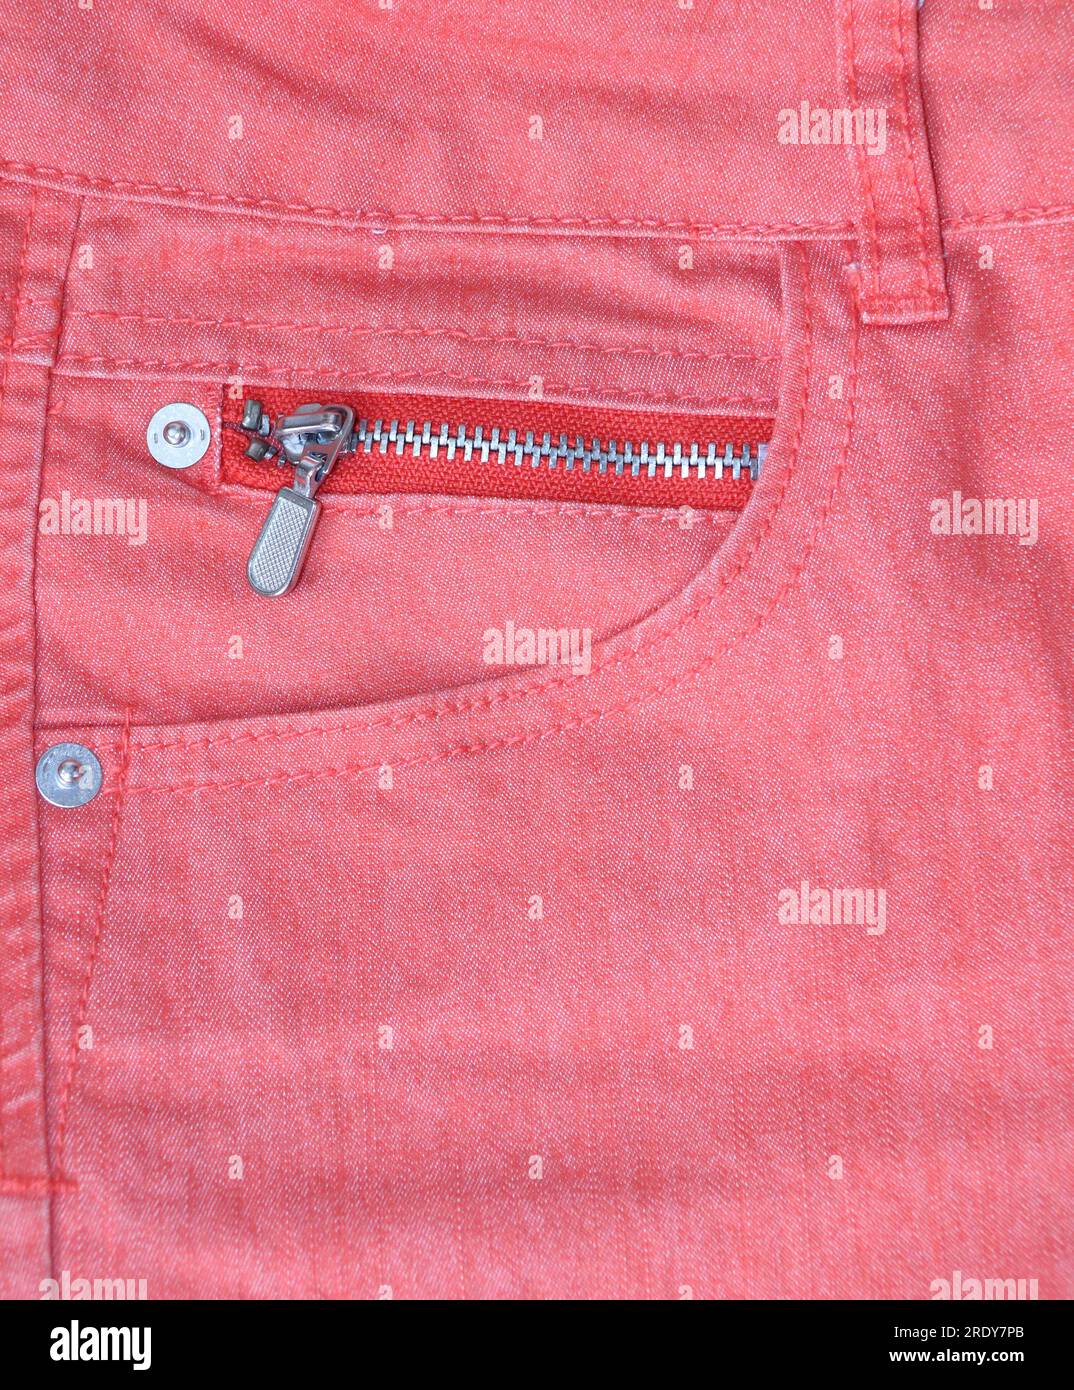 Jeans pocket of pink color. Vertical background with denim texture of coral color and pocket Stock Photo